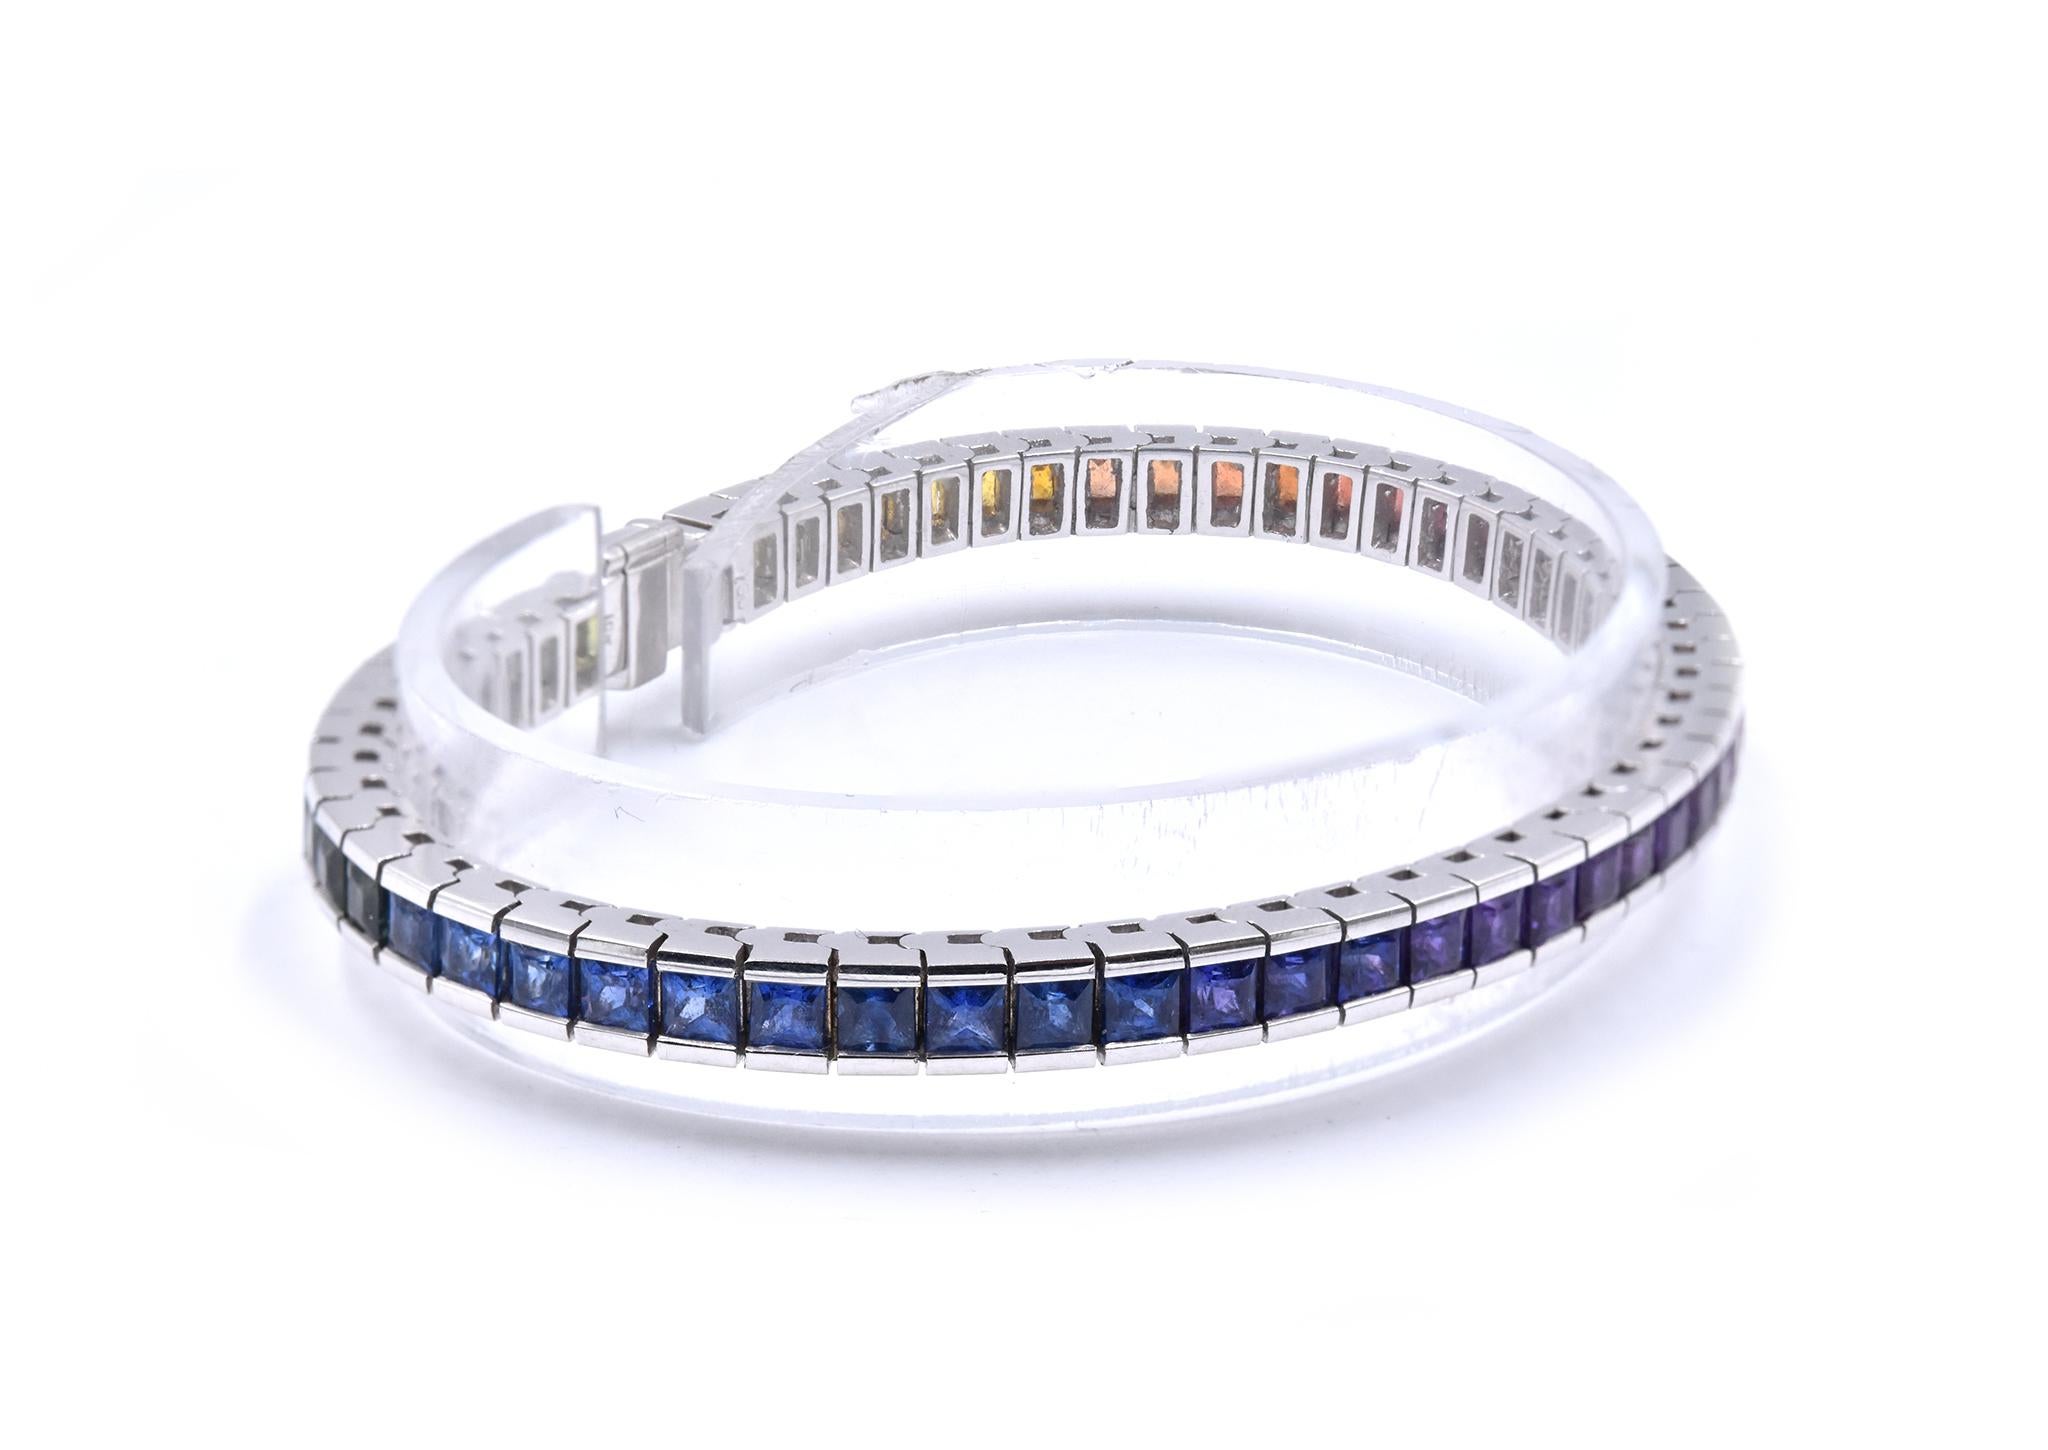 Material: 18K white gold
Sapphire: 59 princess cut = 10.03cttw
Color: Rainbow
Dimensions: bracelet will fit a 7.5-inch wrist
Weight: 26.3 grams
